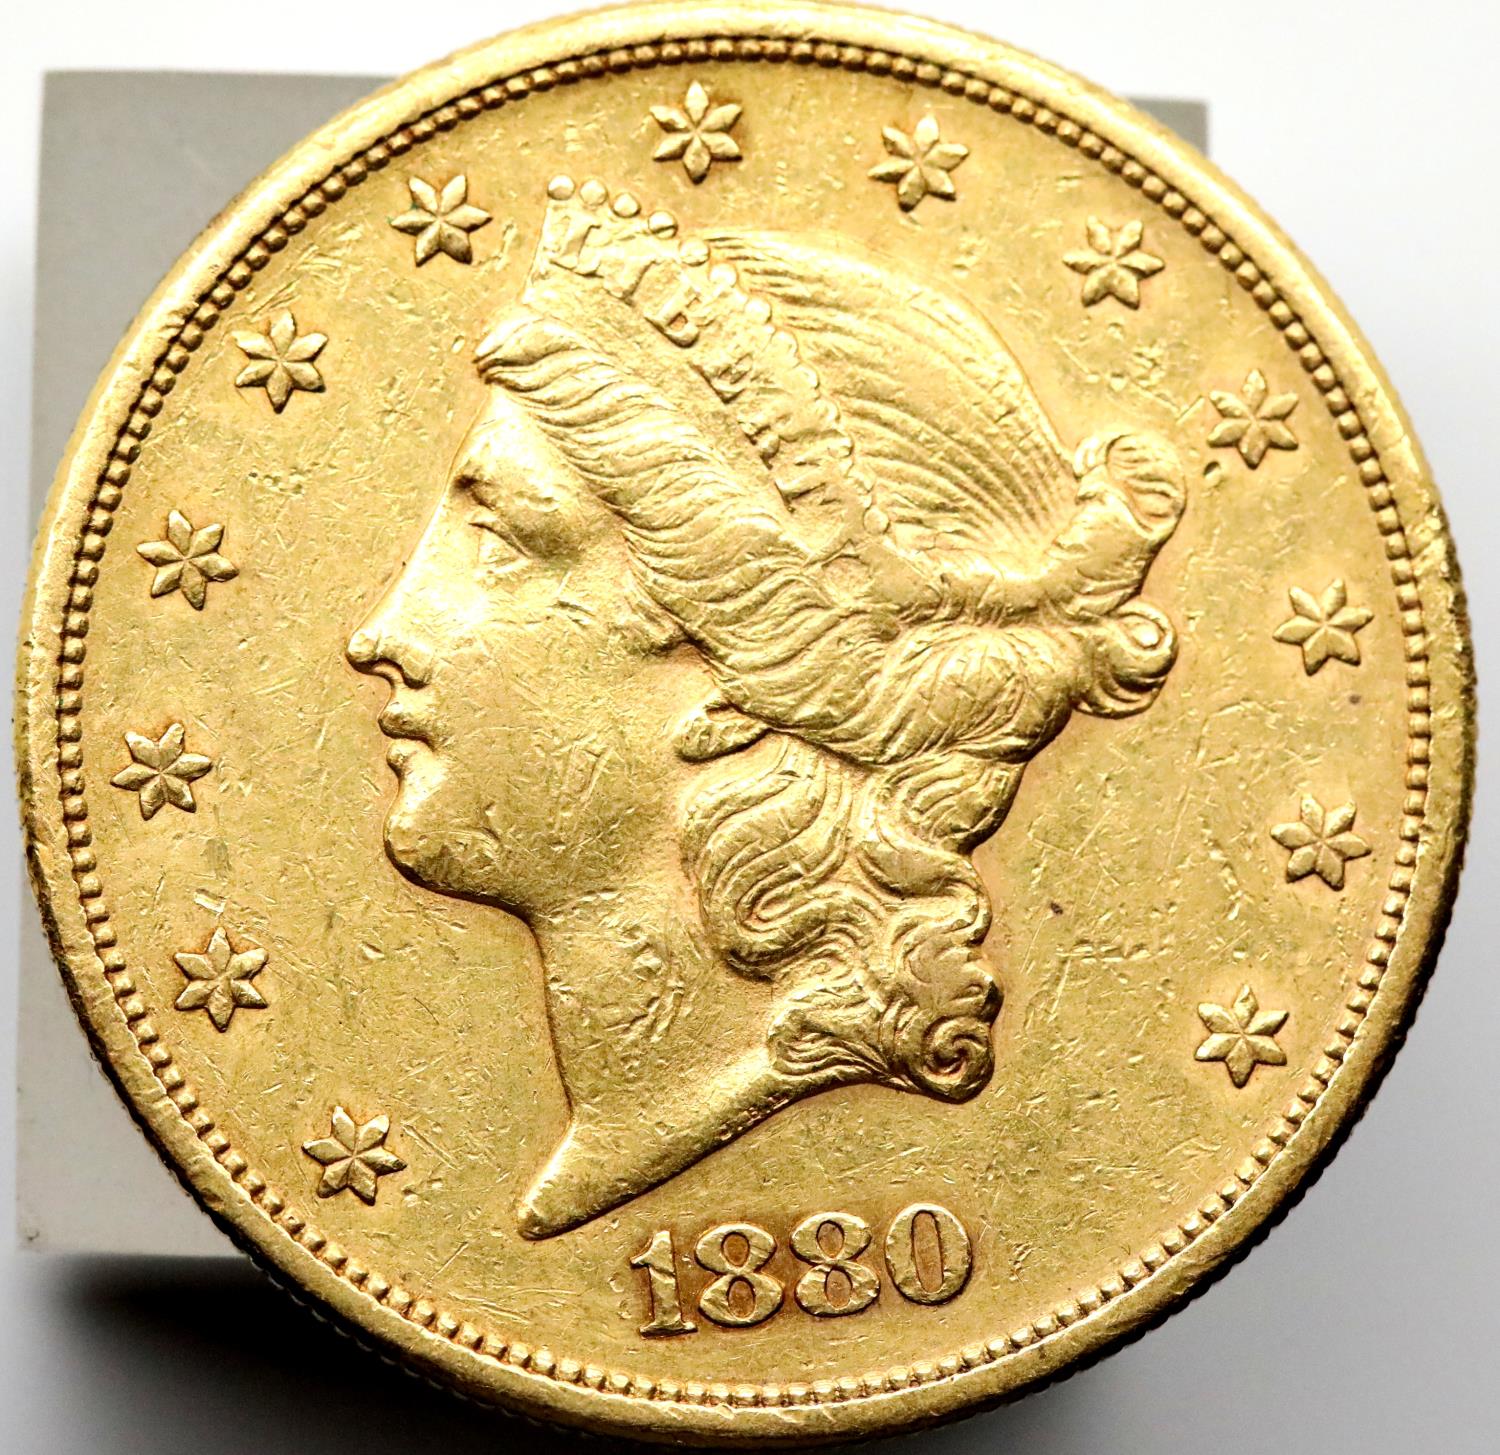 American 1880 Gold San Francisco mint 20 Dollar coin with fine definition. P&P Group 2 (£18+VAT